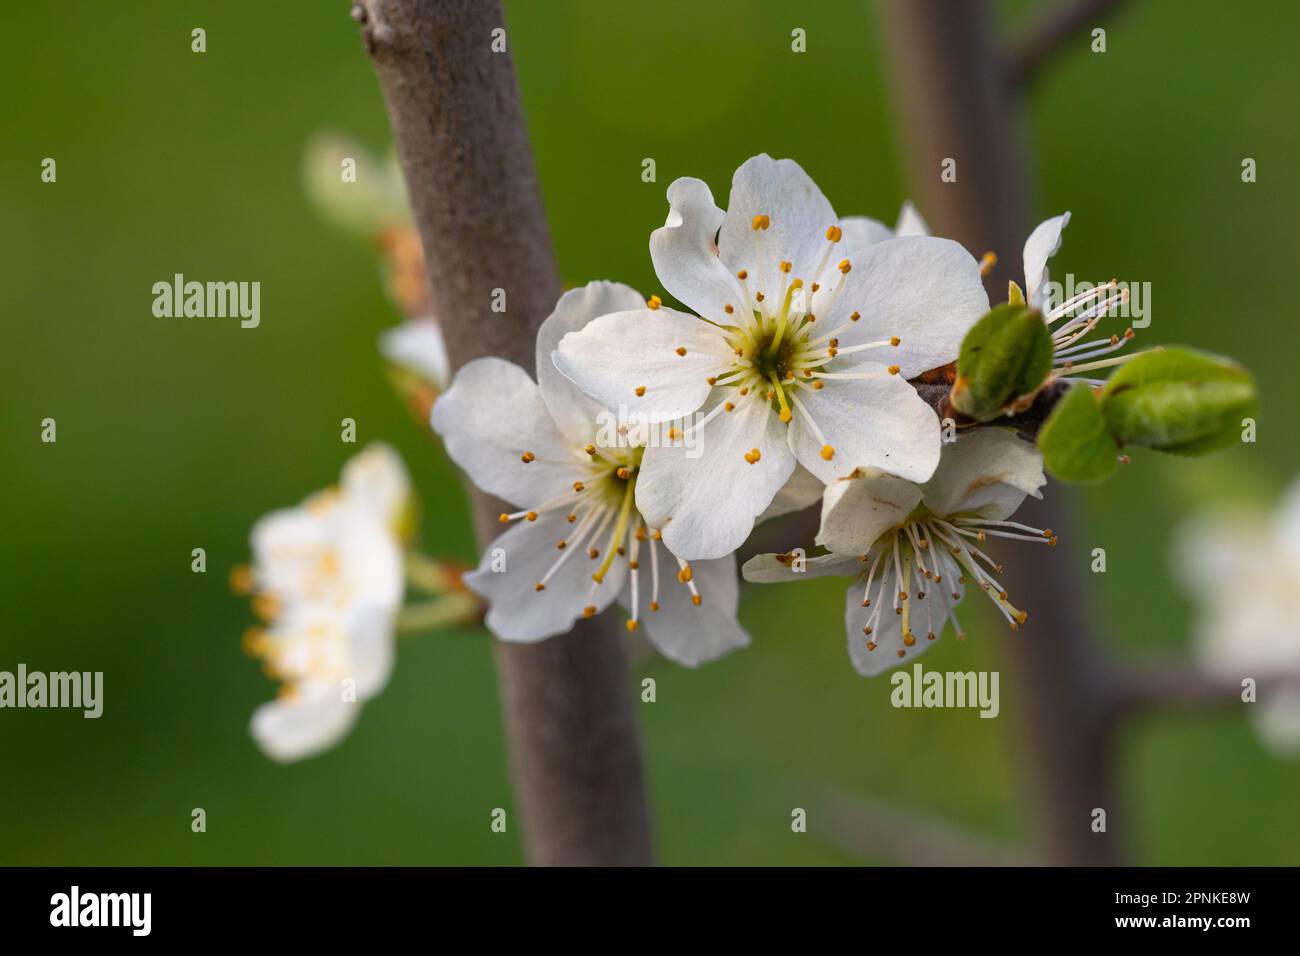 Cherry plum flowers in early spring. Stock Photo